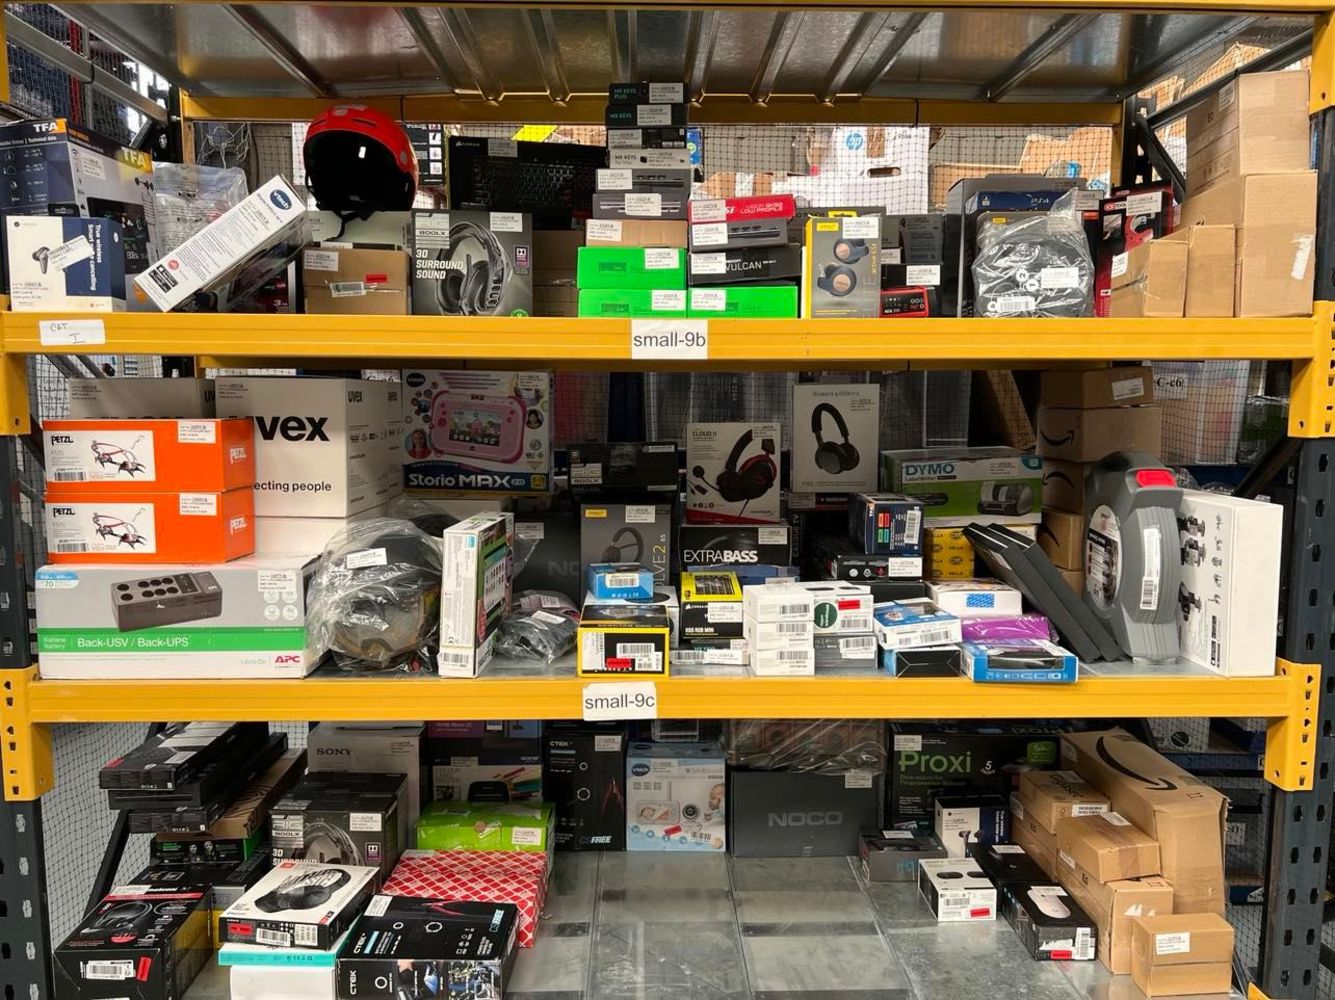 ||Apple, Swarovski, Philips, Hp, Bosch, Tommy Hilfiger||Smartwatch, Airpods, Tv, Oven, Toner, Toaster ||Sale Up to 90%! Amazon Raw Returns||